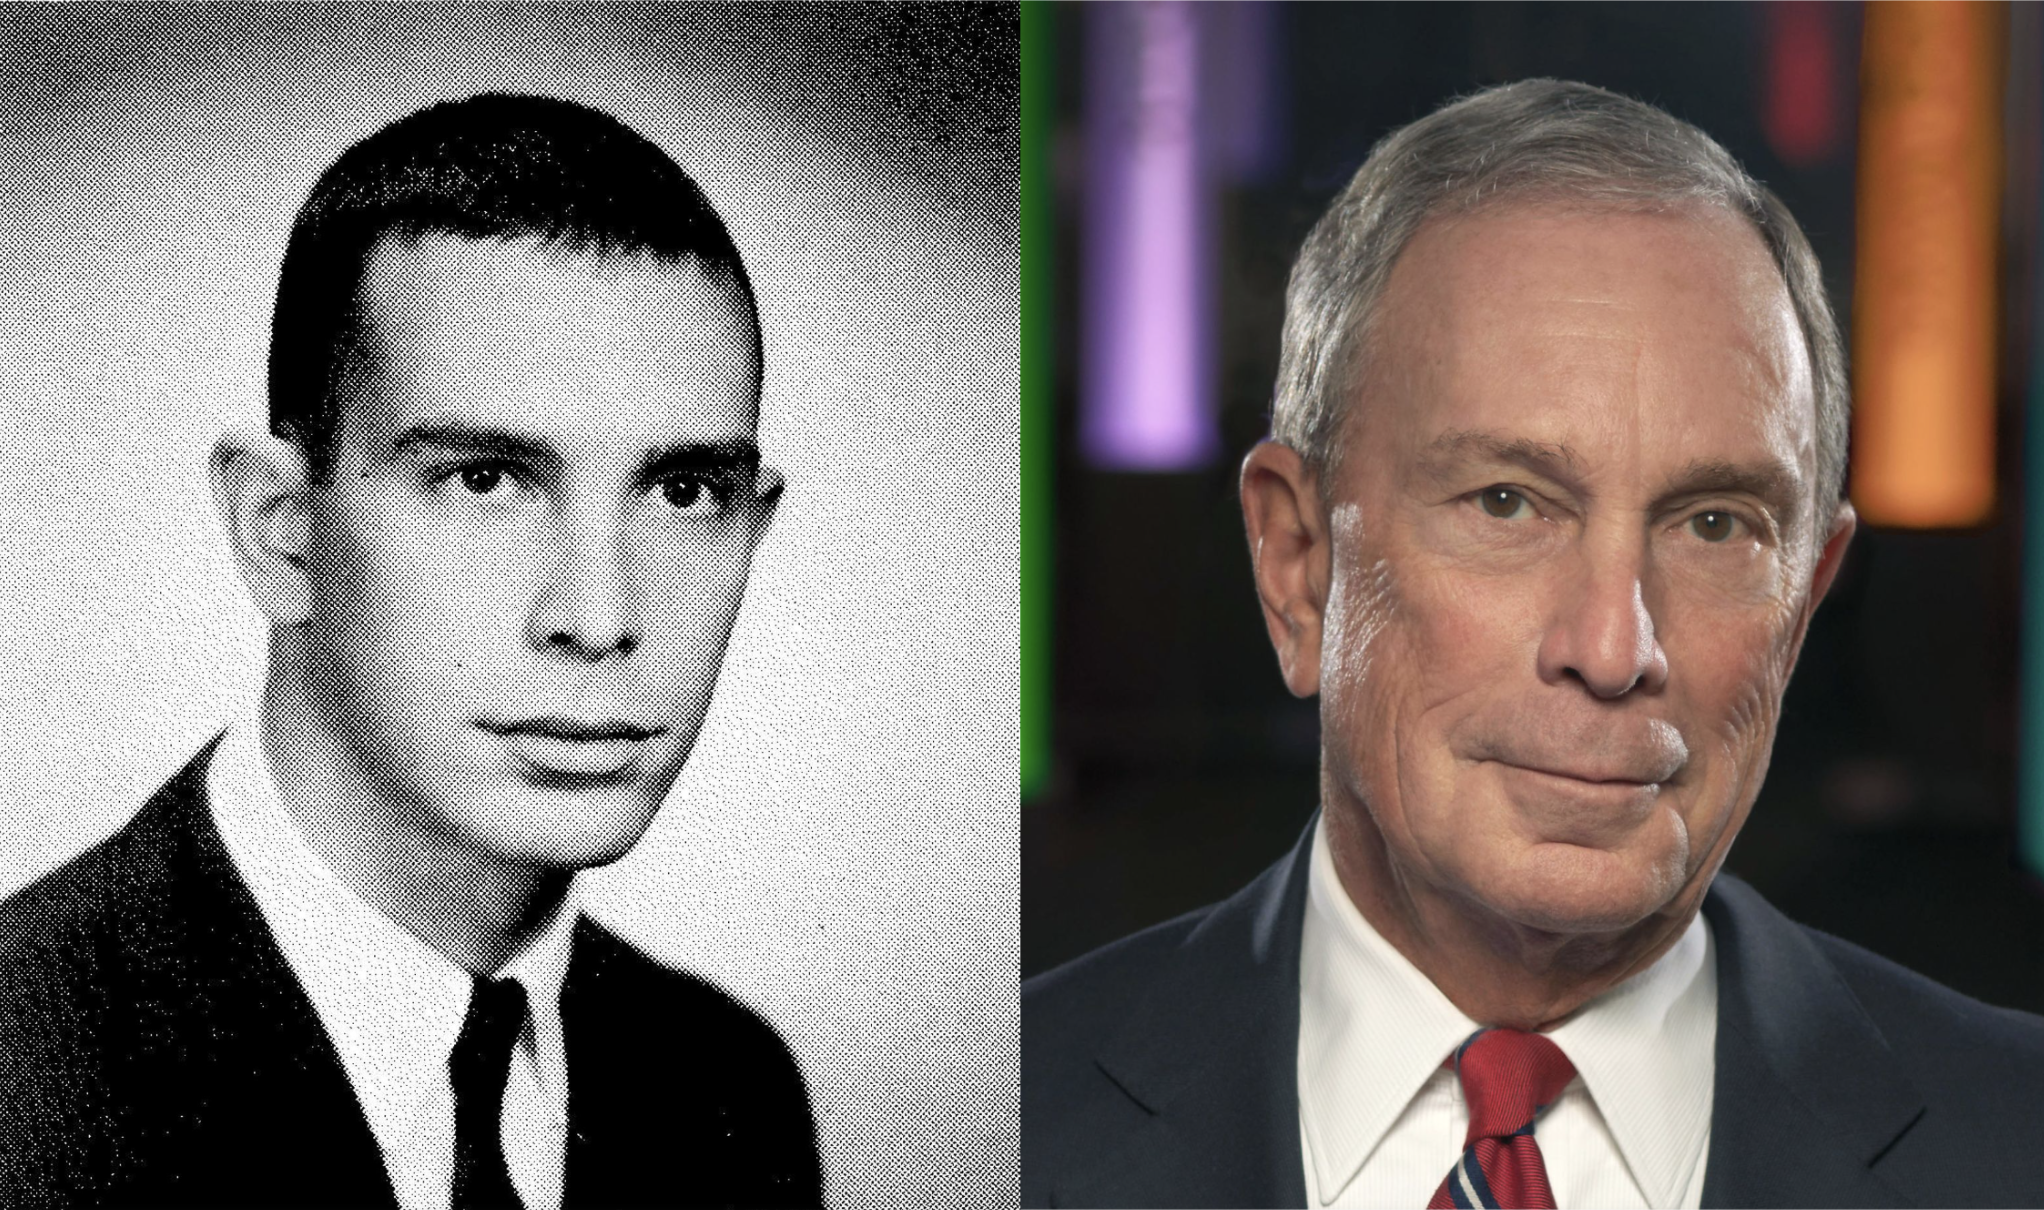 Side-by-side images of Michael Bloomberg: (left) from the 1964 edition of the Hullabaloo yearbook produced by Johns Hopkins University and (right) a recent headshot from Bloomberg Philanthropies.